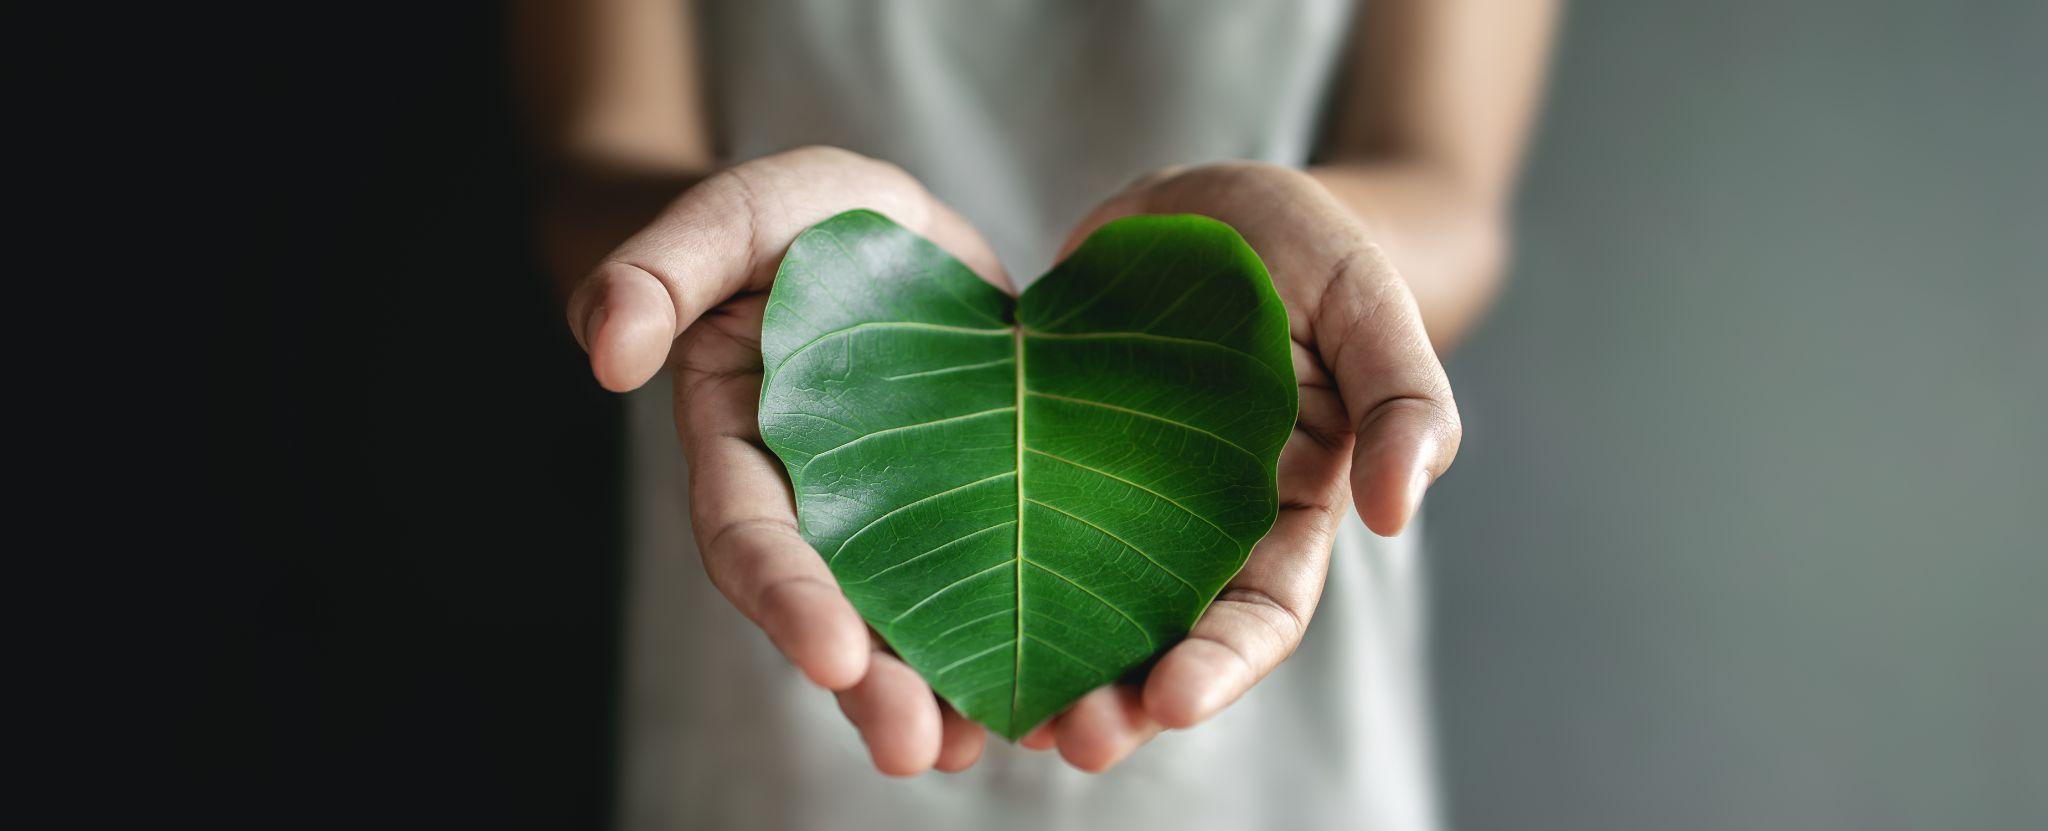 6 Ways Going Green Can Help Your Mental Health